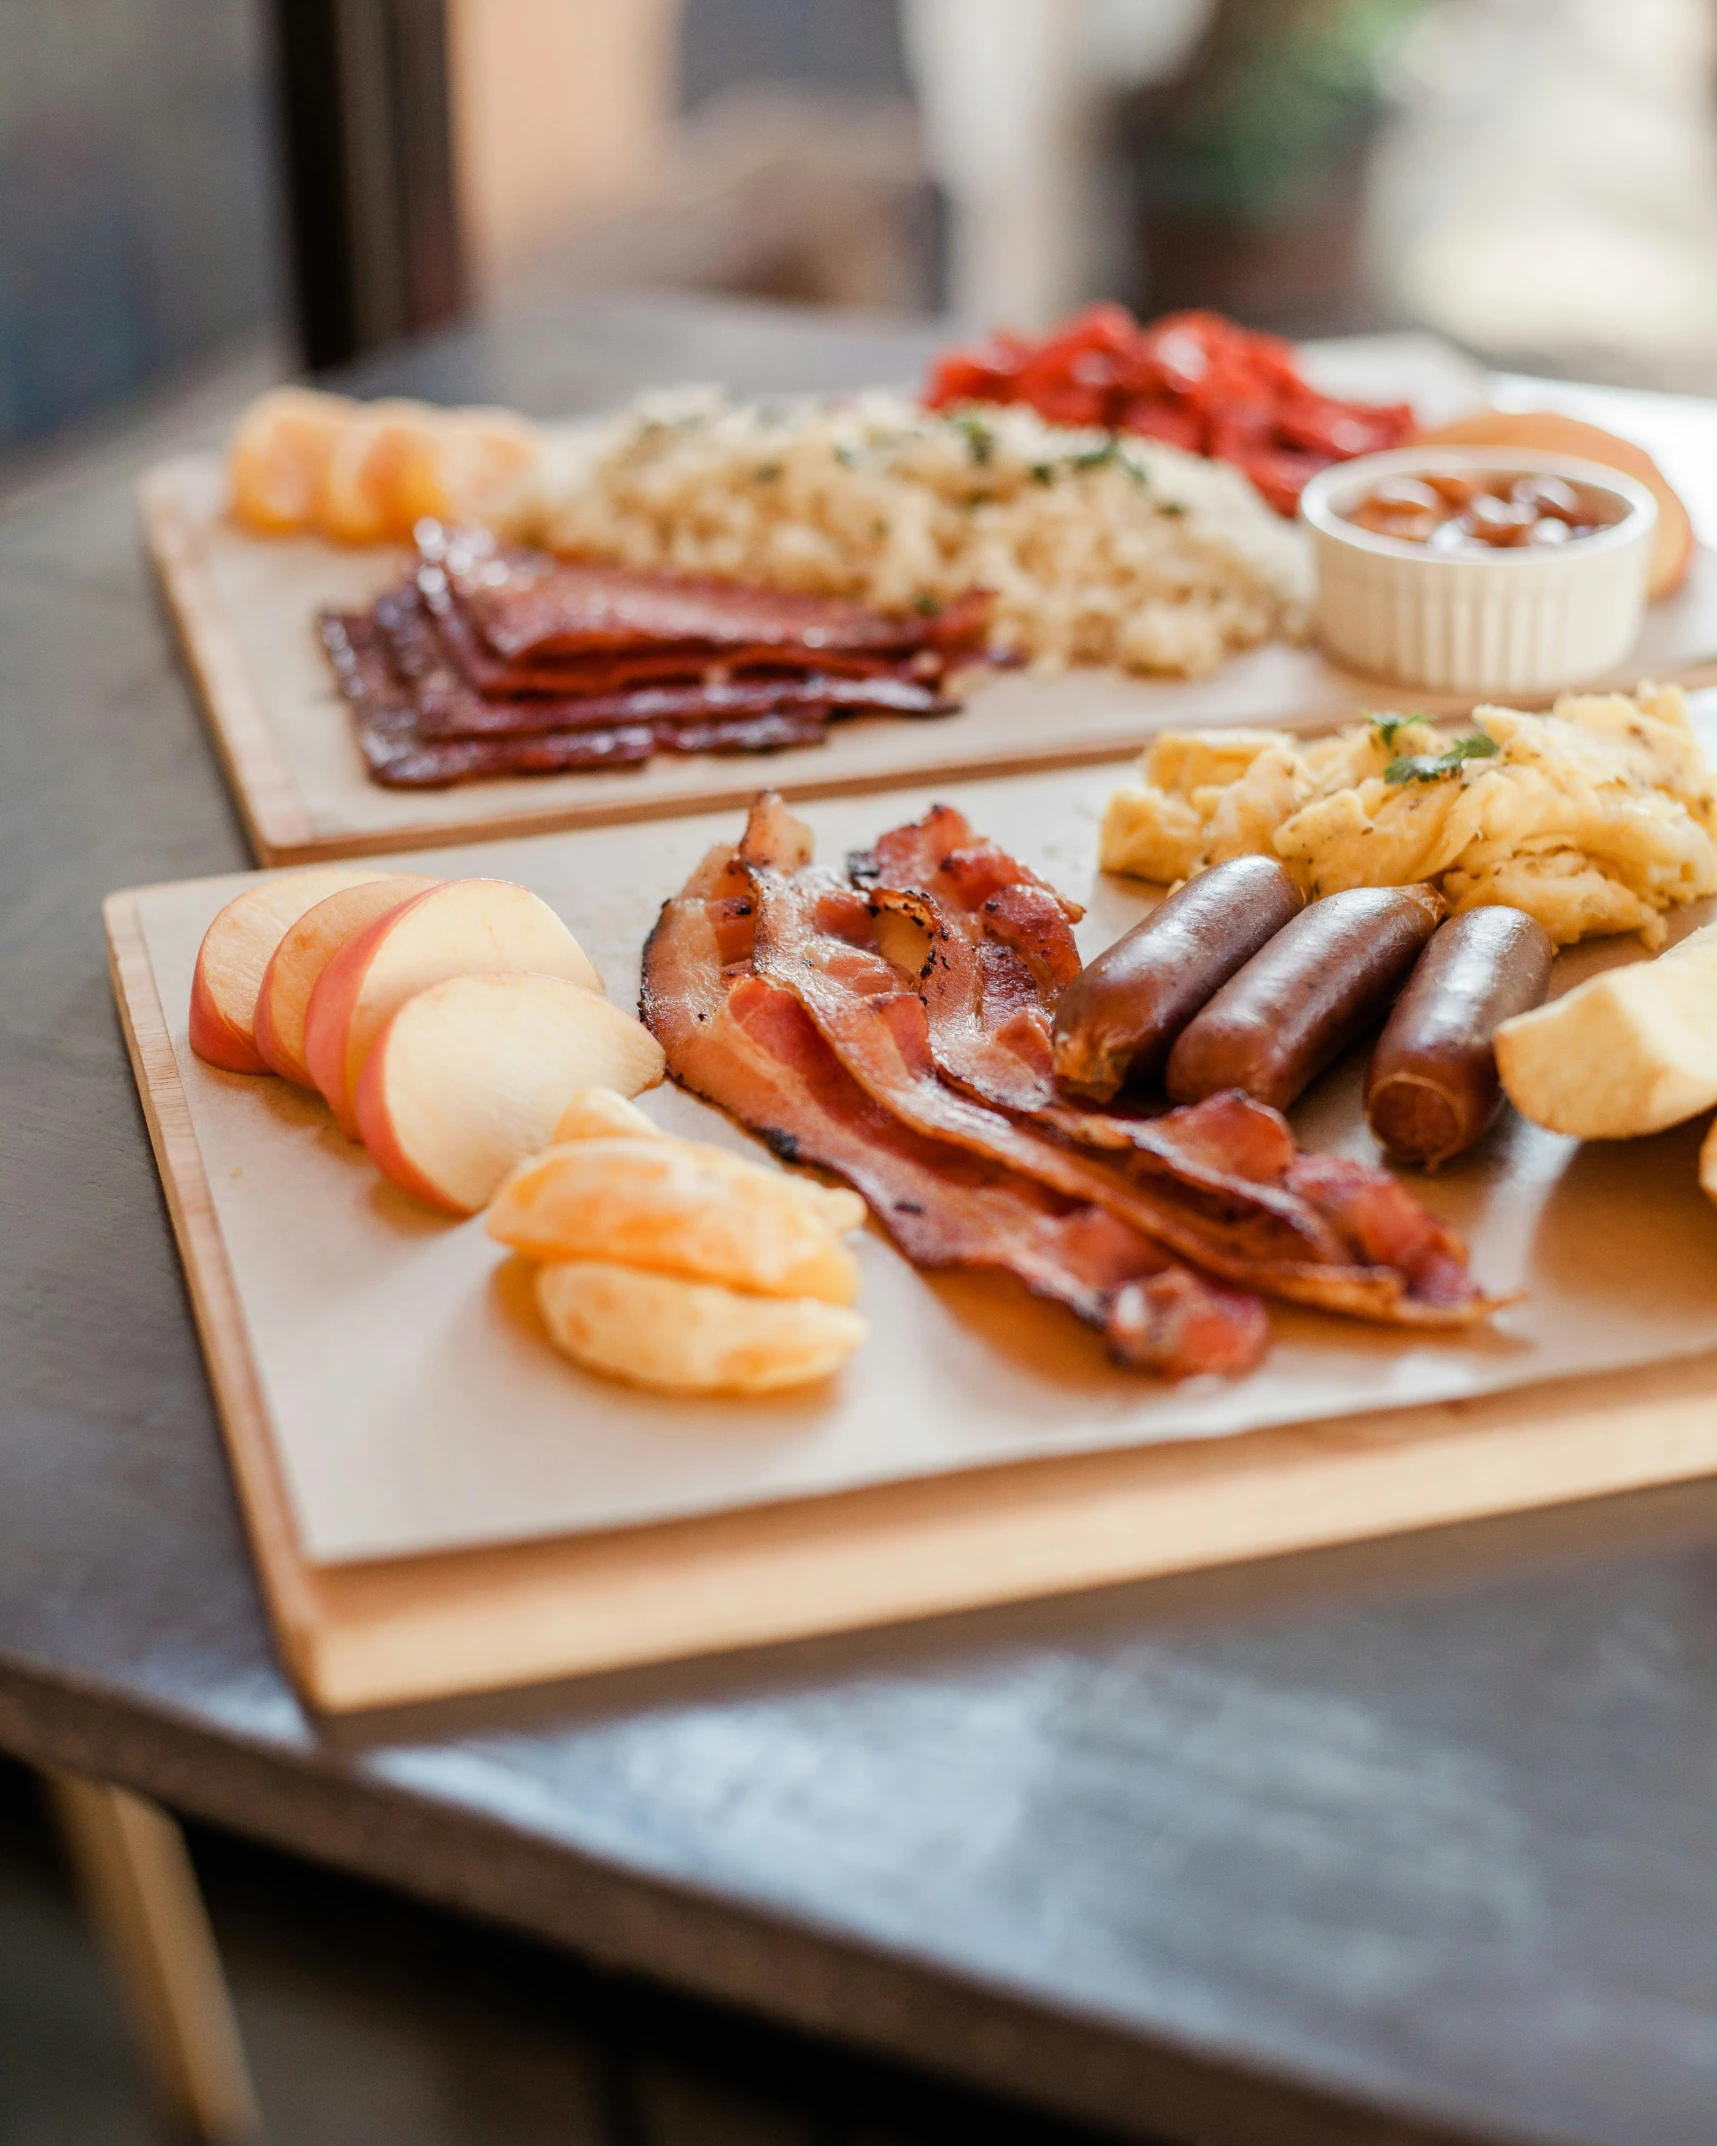 an array of different bacons, cheeses and other foods sit on two wooden plates